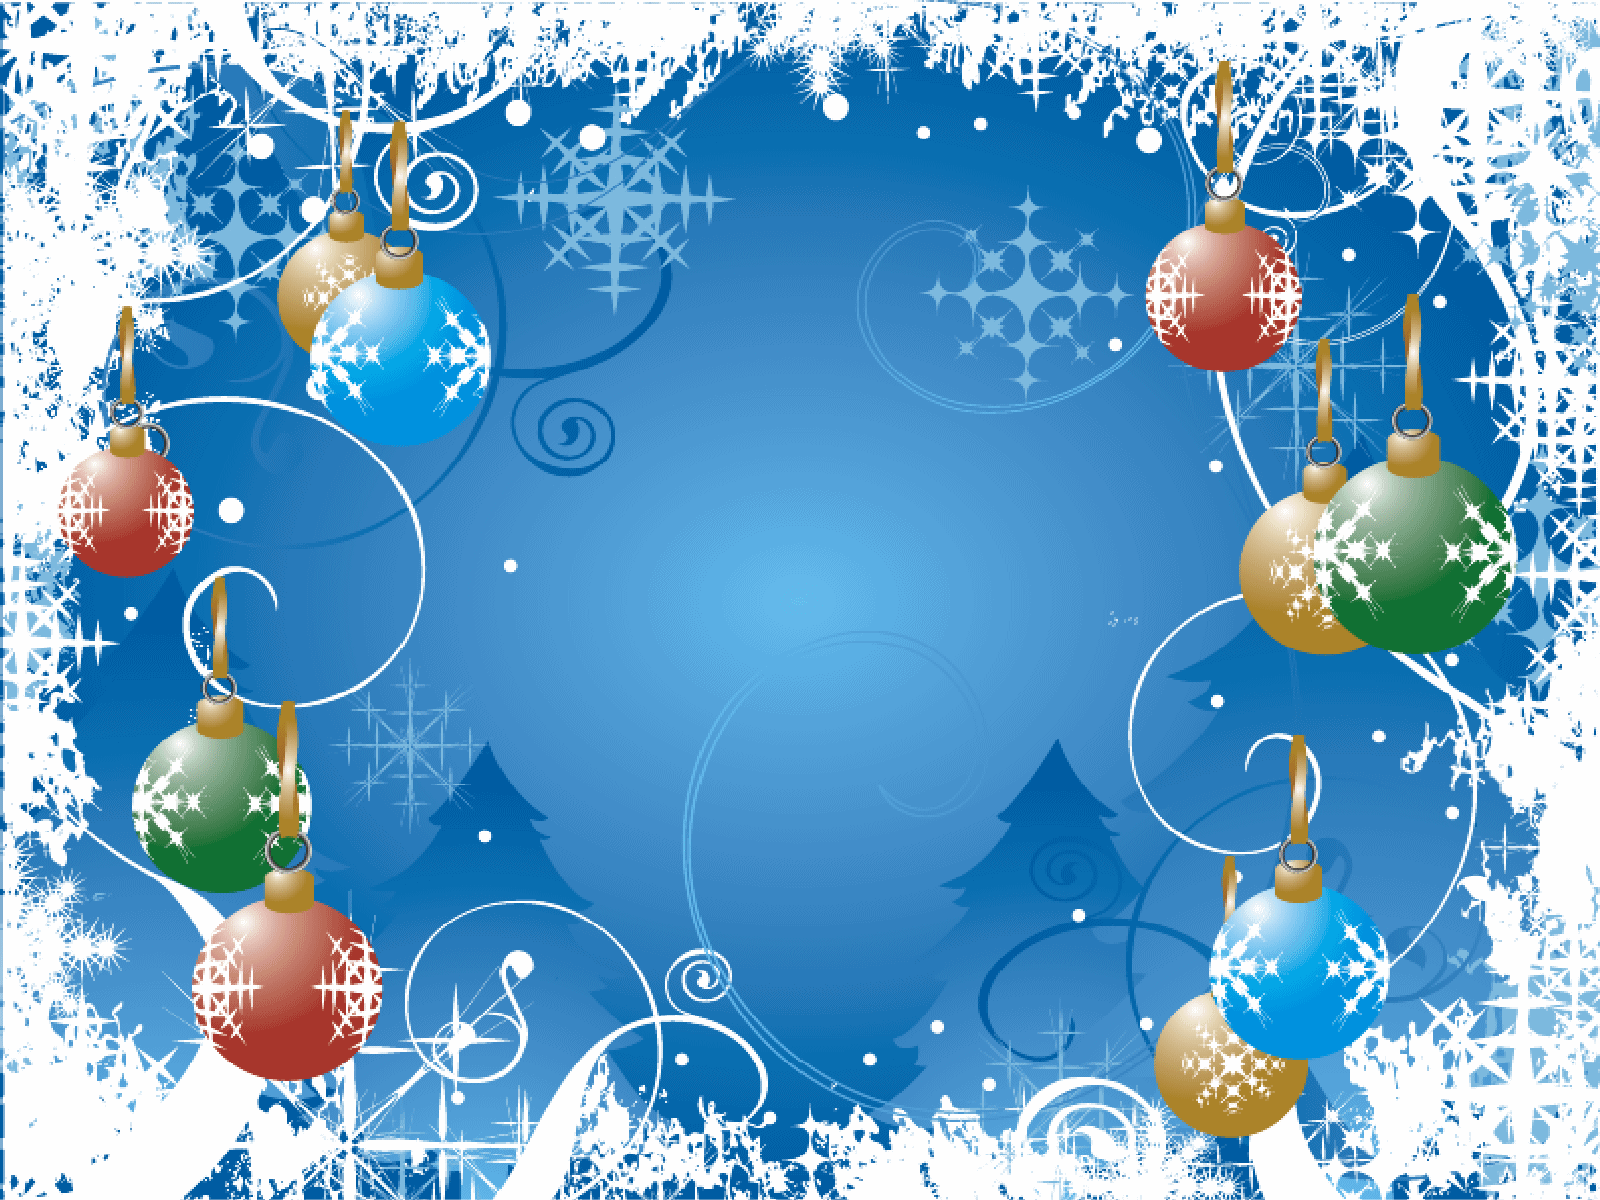 Christmas Backgrounds Wallpapers - Wallpaper Cave